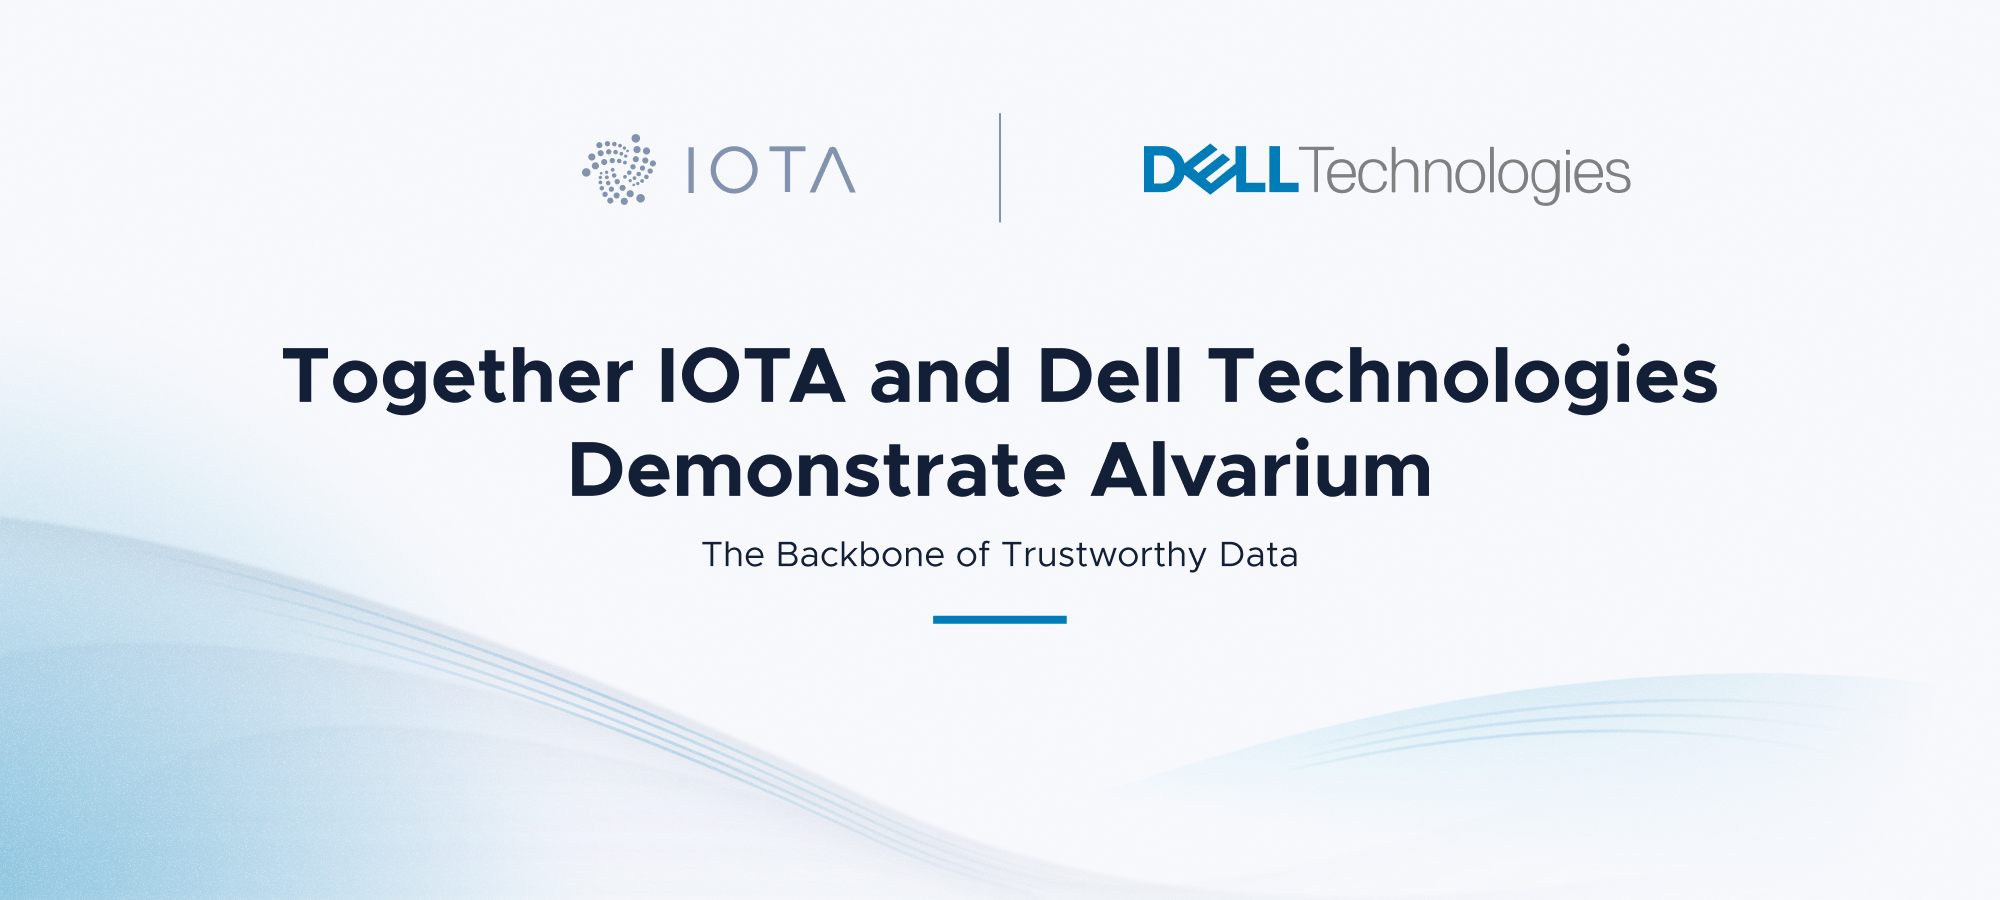 Together IOTA and Dell Technologies Demonstrate Project Alvarium